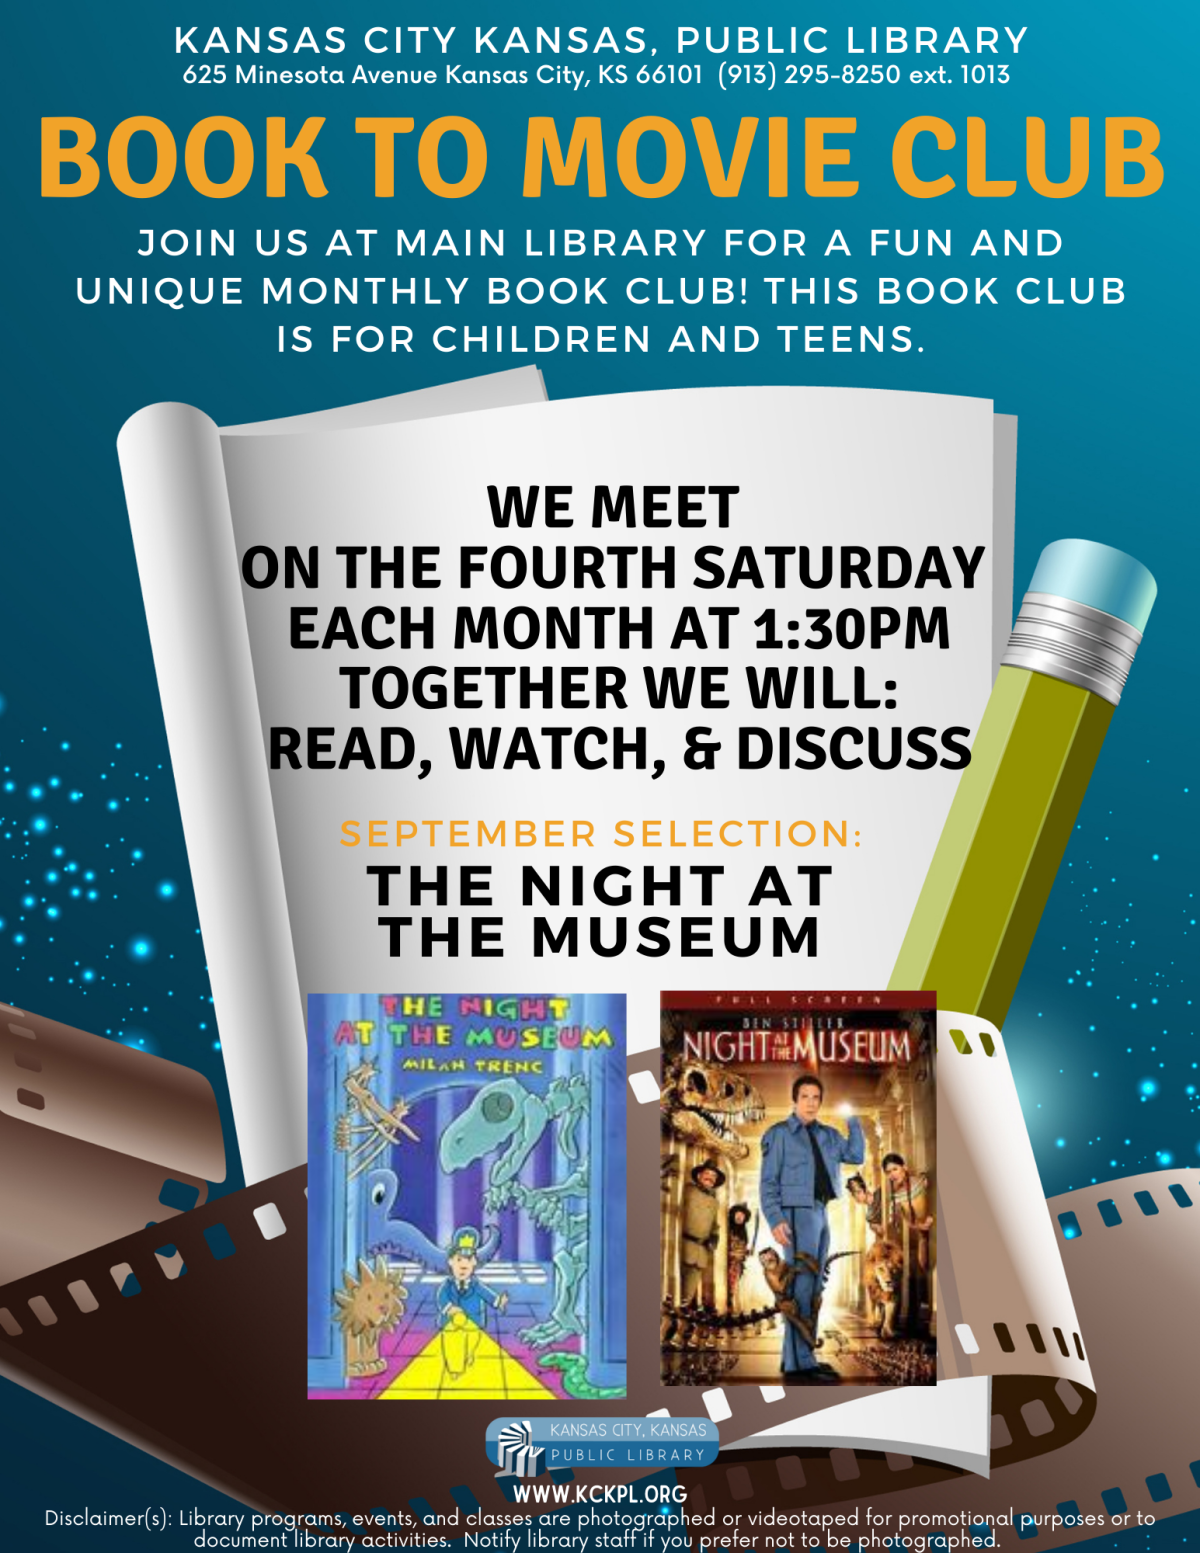 Book to movie club flyer for Main Library. 